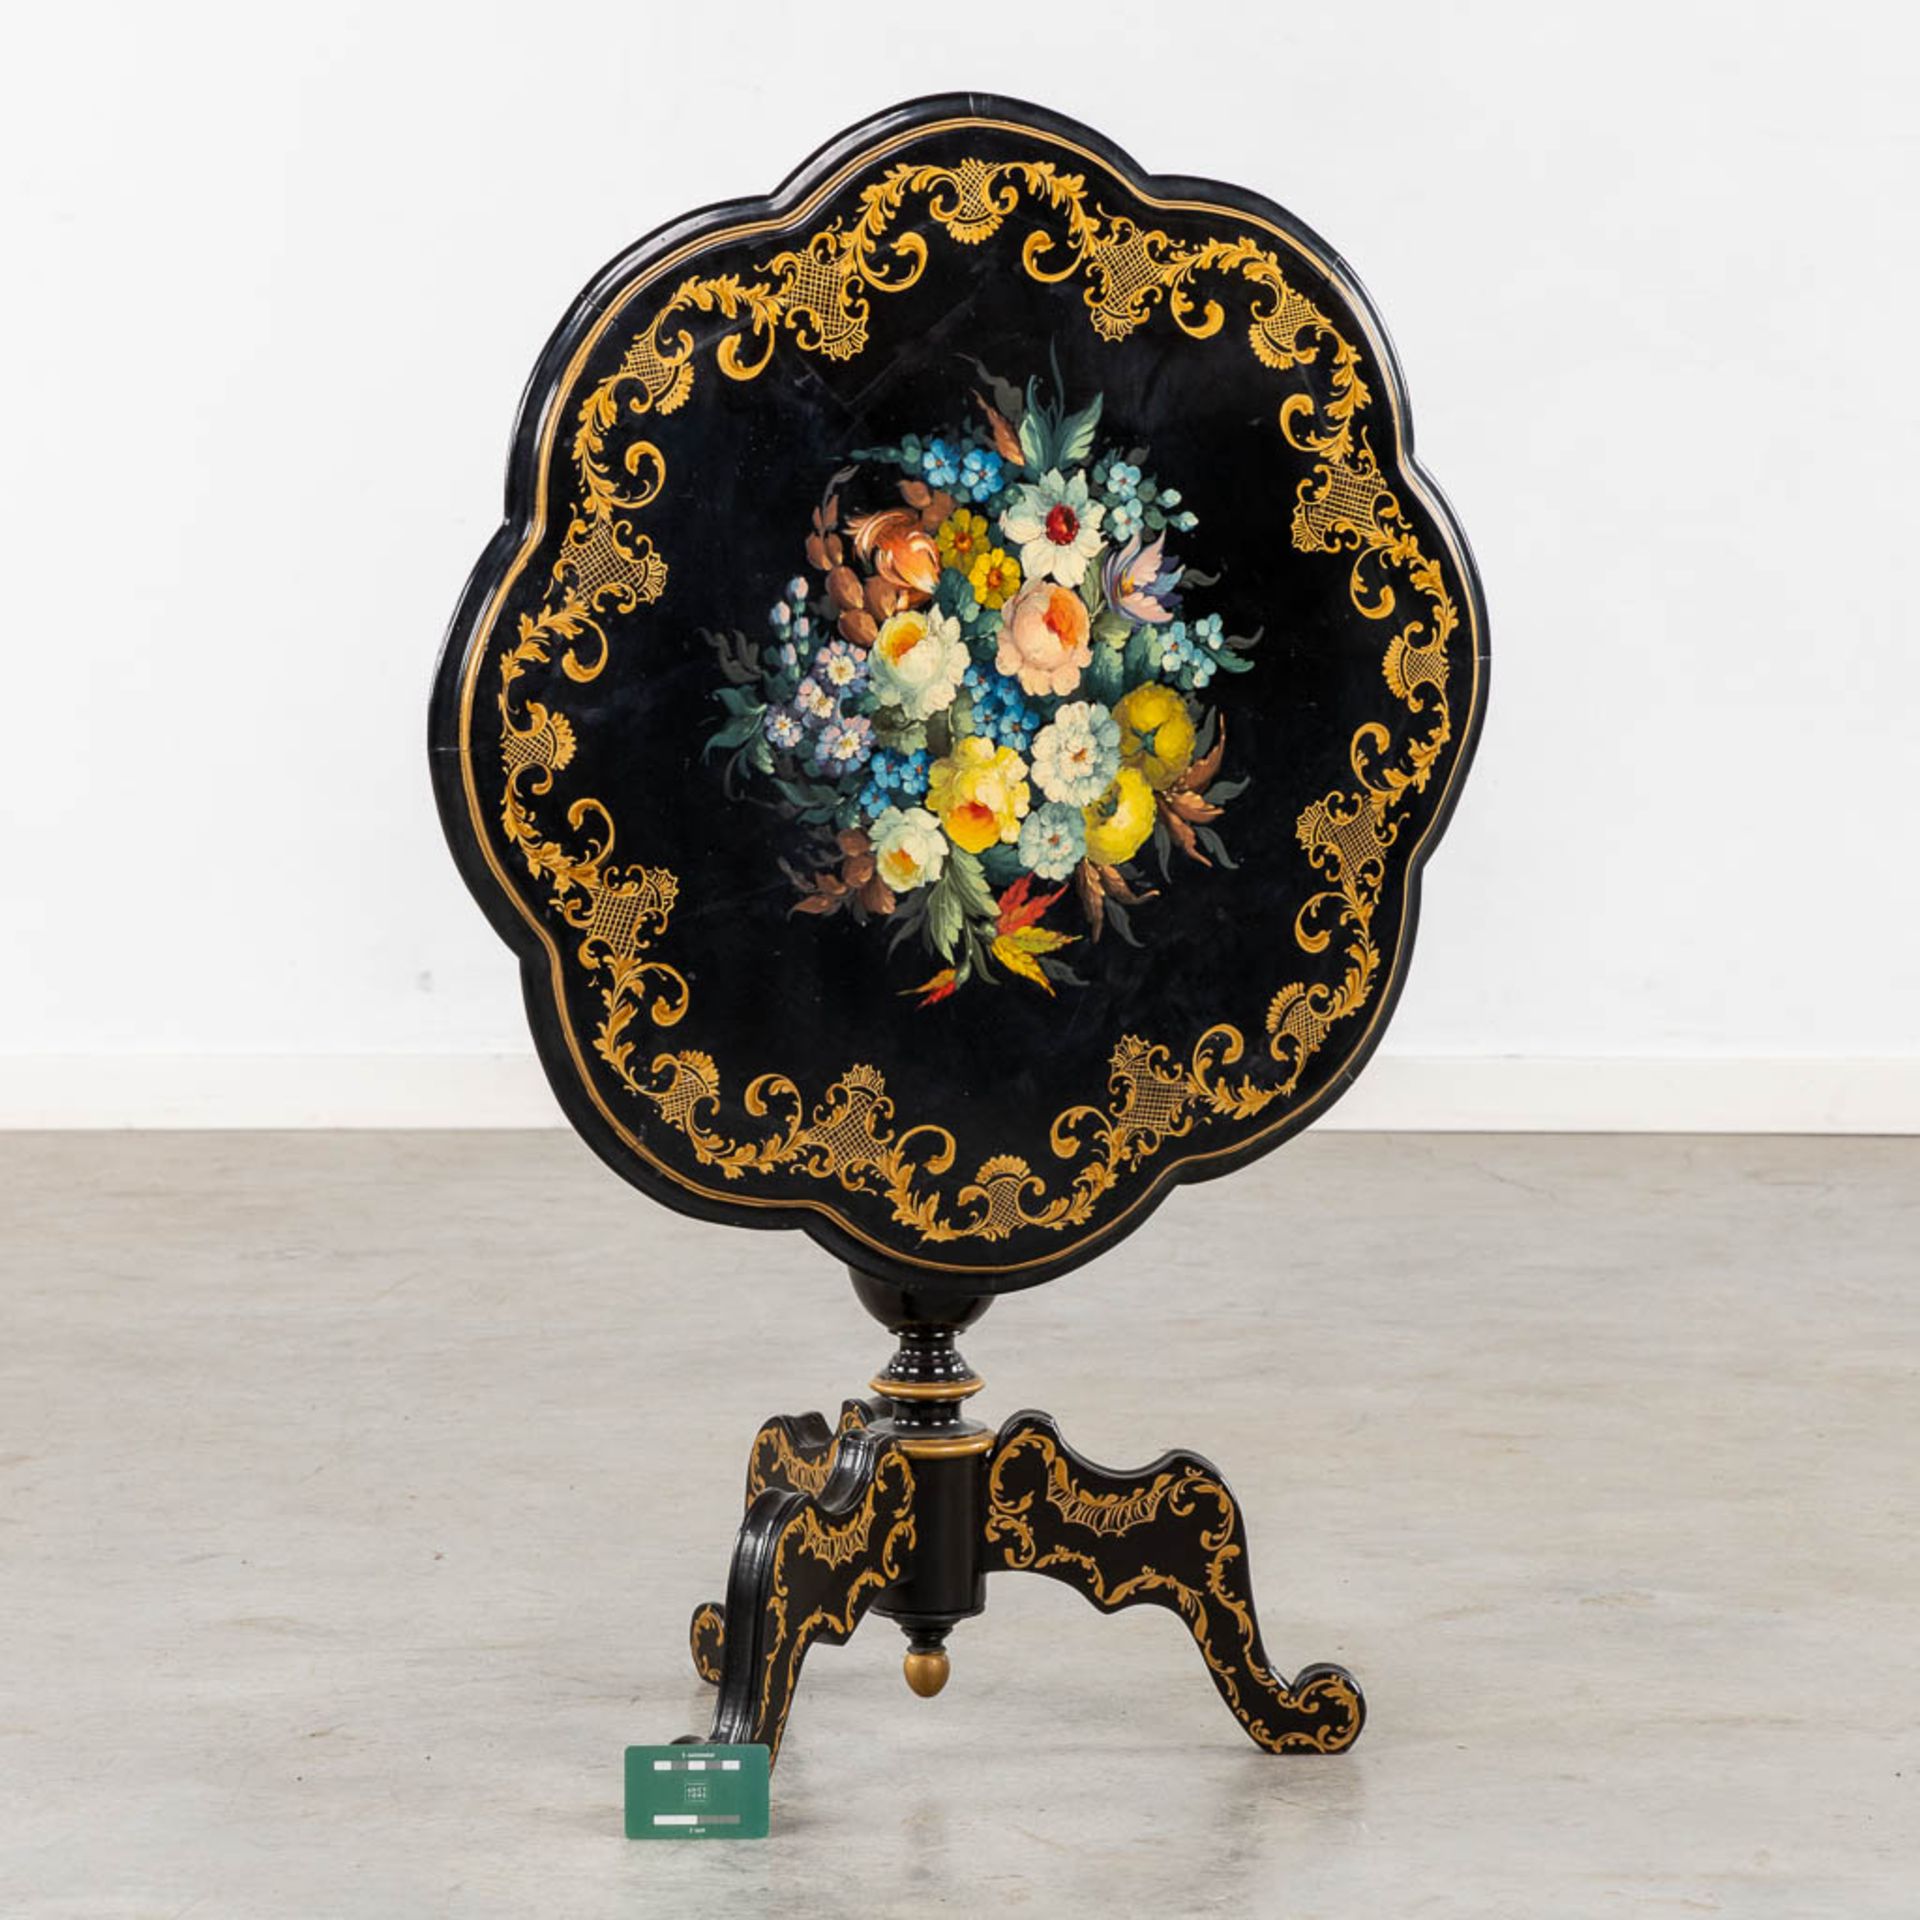 A Tilt-Top table with hand-painted floral decor, Napoleon 3 style. (H:67 x D:72 cm) - Image 2 of 9